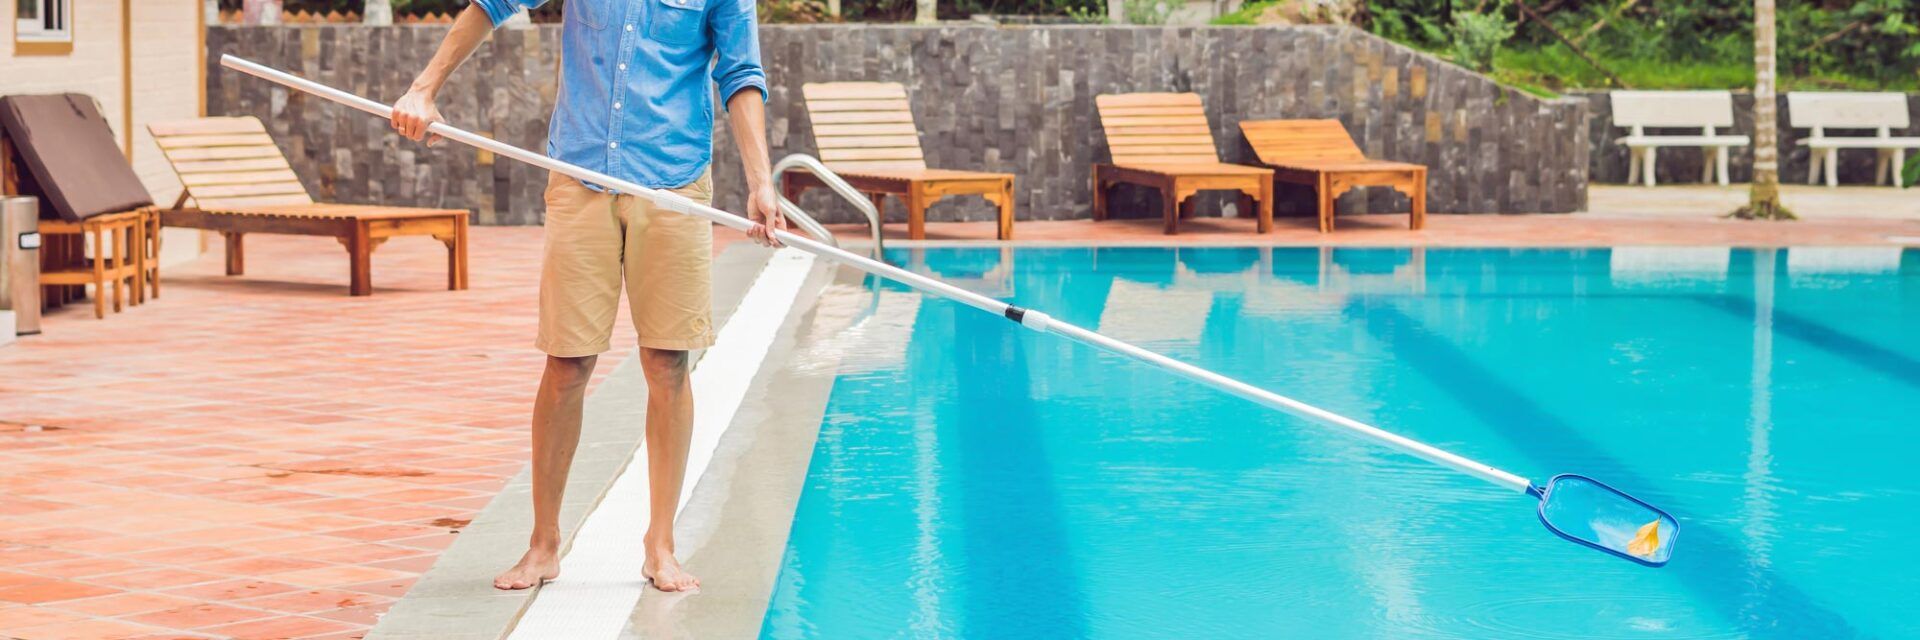 Pool Cleaning and Maintenance in Riverside, CA - by Paul's Pool Magic